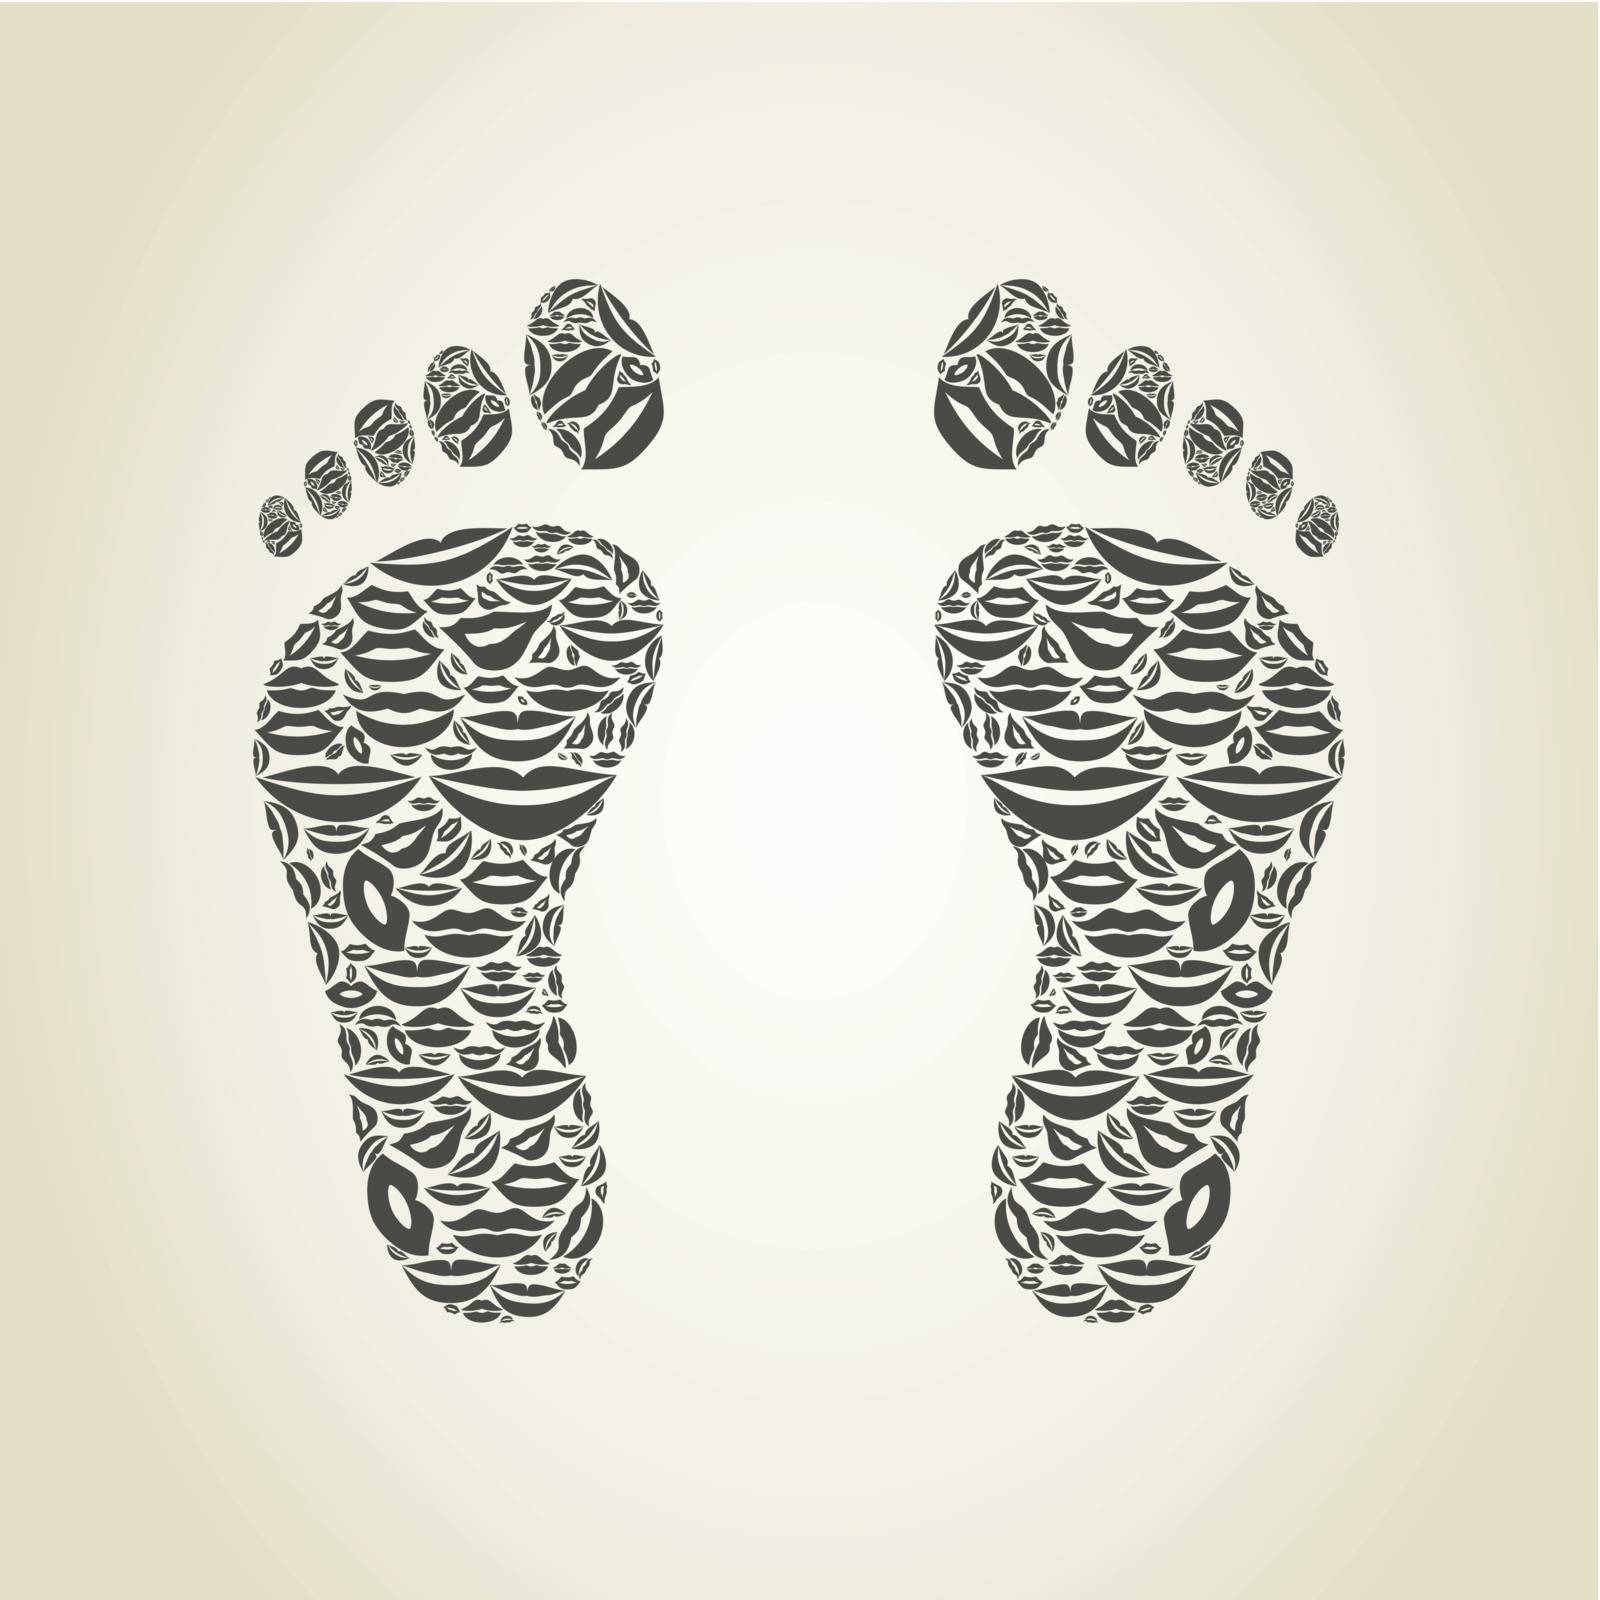 Foot made of lips. A vector illustration